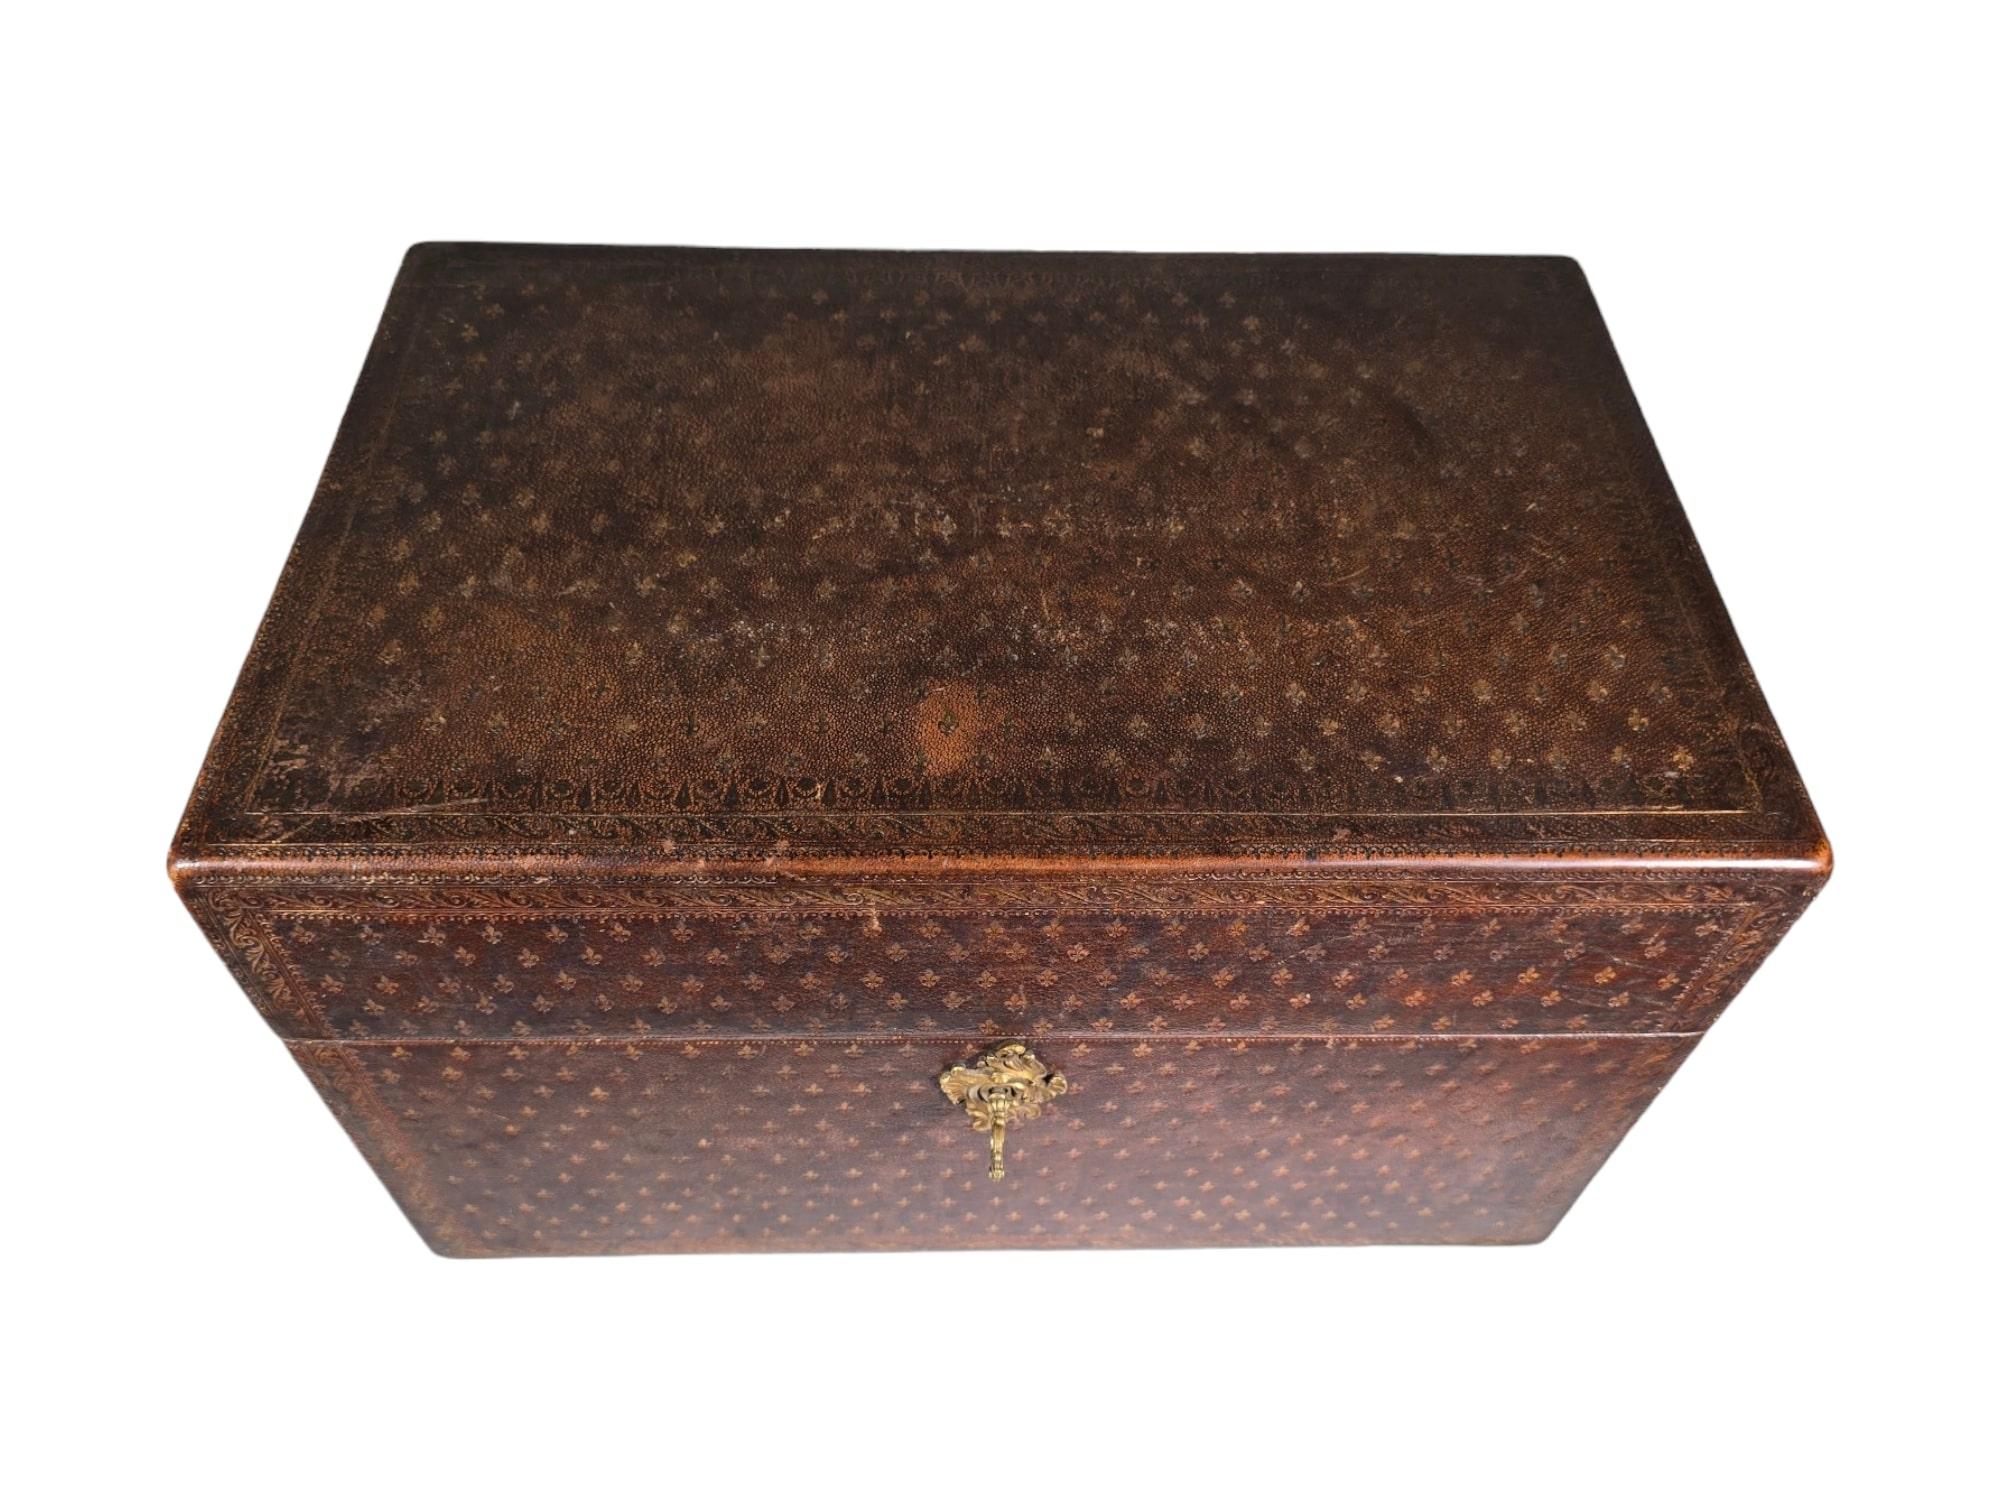 This exquisite liquor chest, accompanied by 18th-century glassware, epitomizes the opulence and sophistication of the era. Adorned with intricate leather embossing featuring floral motifs, accented with gilded iron detailing, this chest exudes